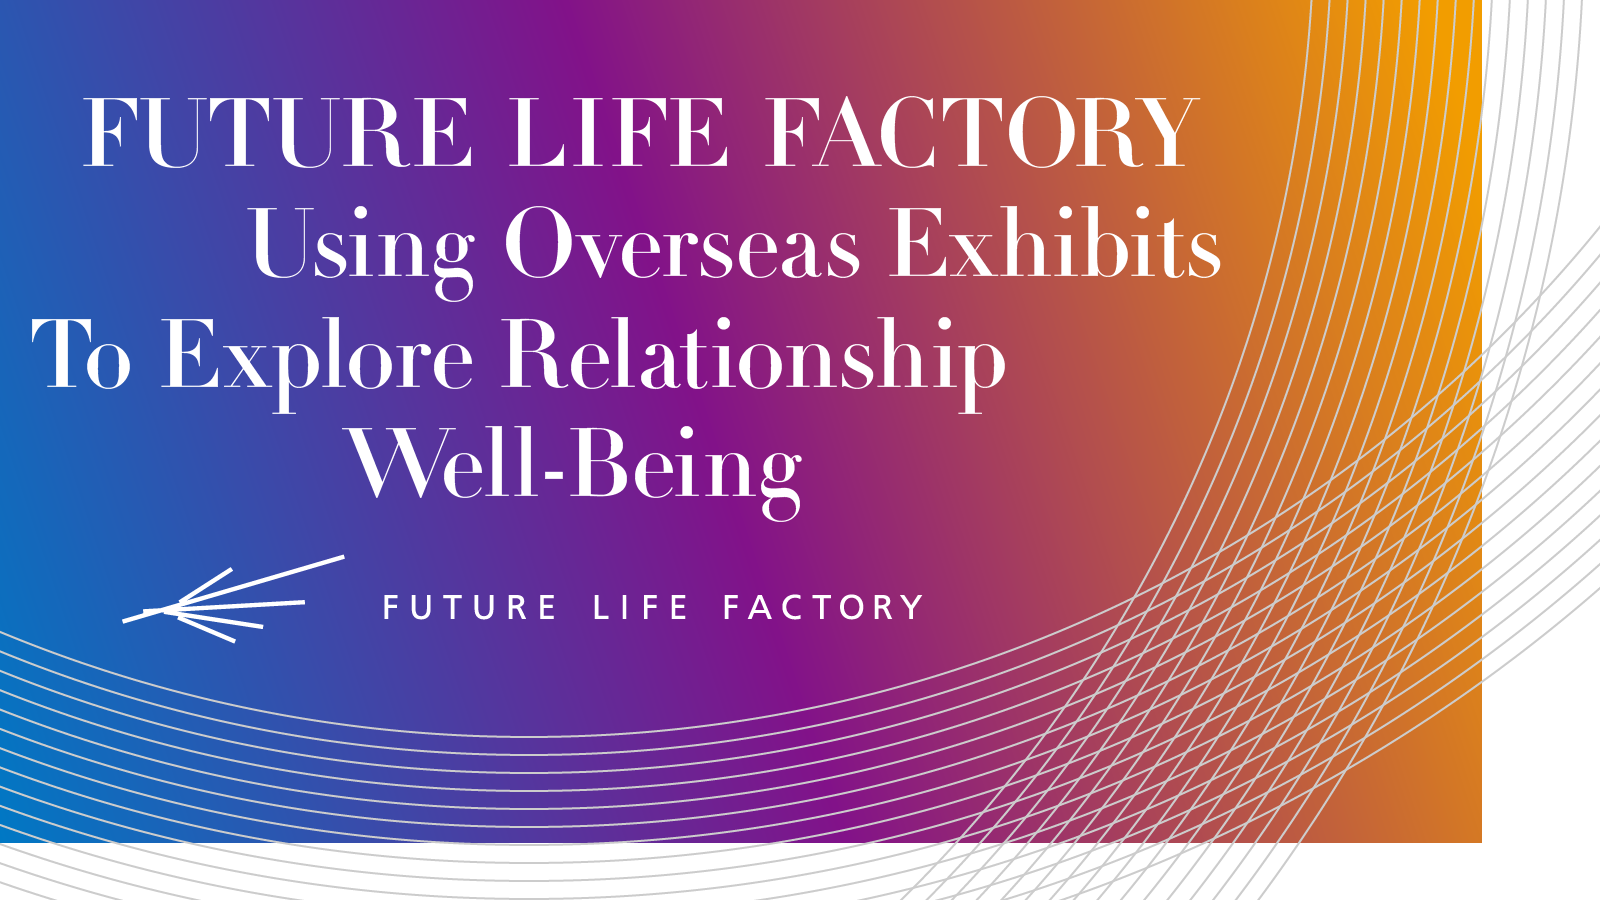 FUTURE LIFE FACTORY Using Overseas Exhibits to Explore Relationship Well-Being